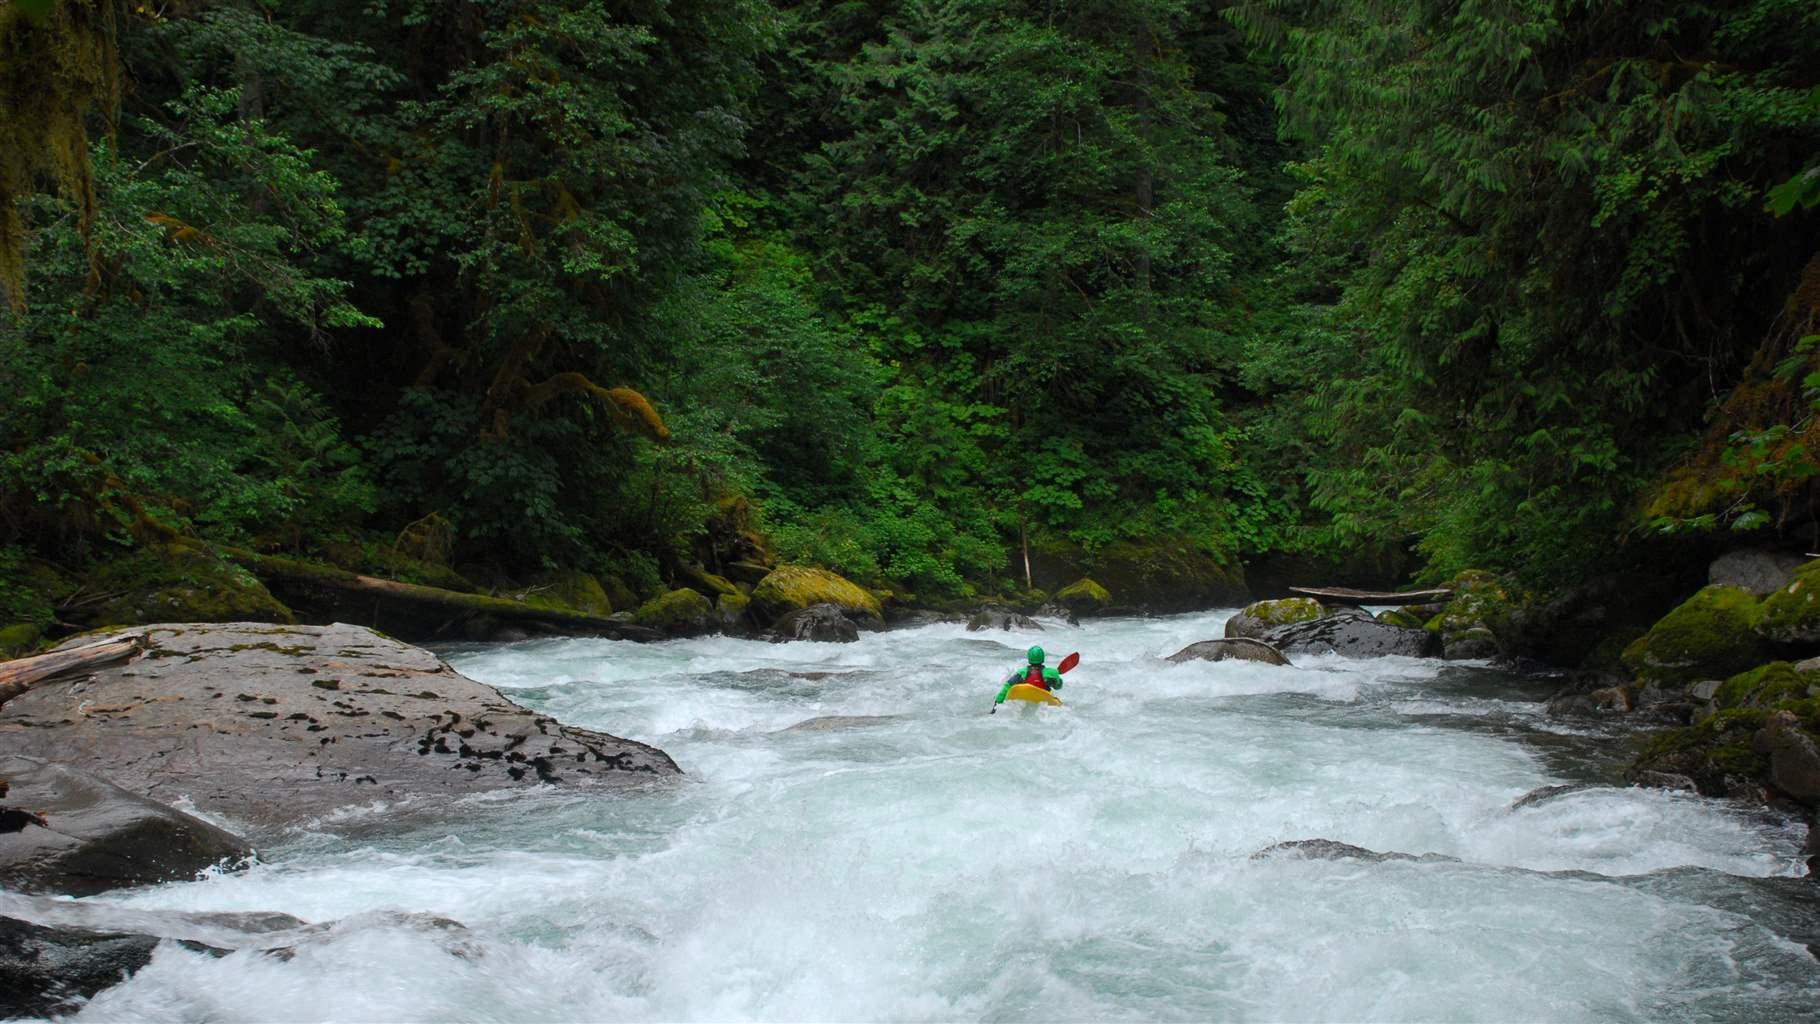 A whitewater kayaker runs down the center of a stretch of turbulent rapids on a river lined on both shores by large rock formations and dense, dark green forest.